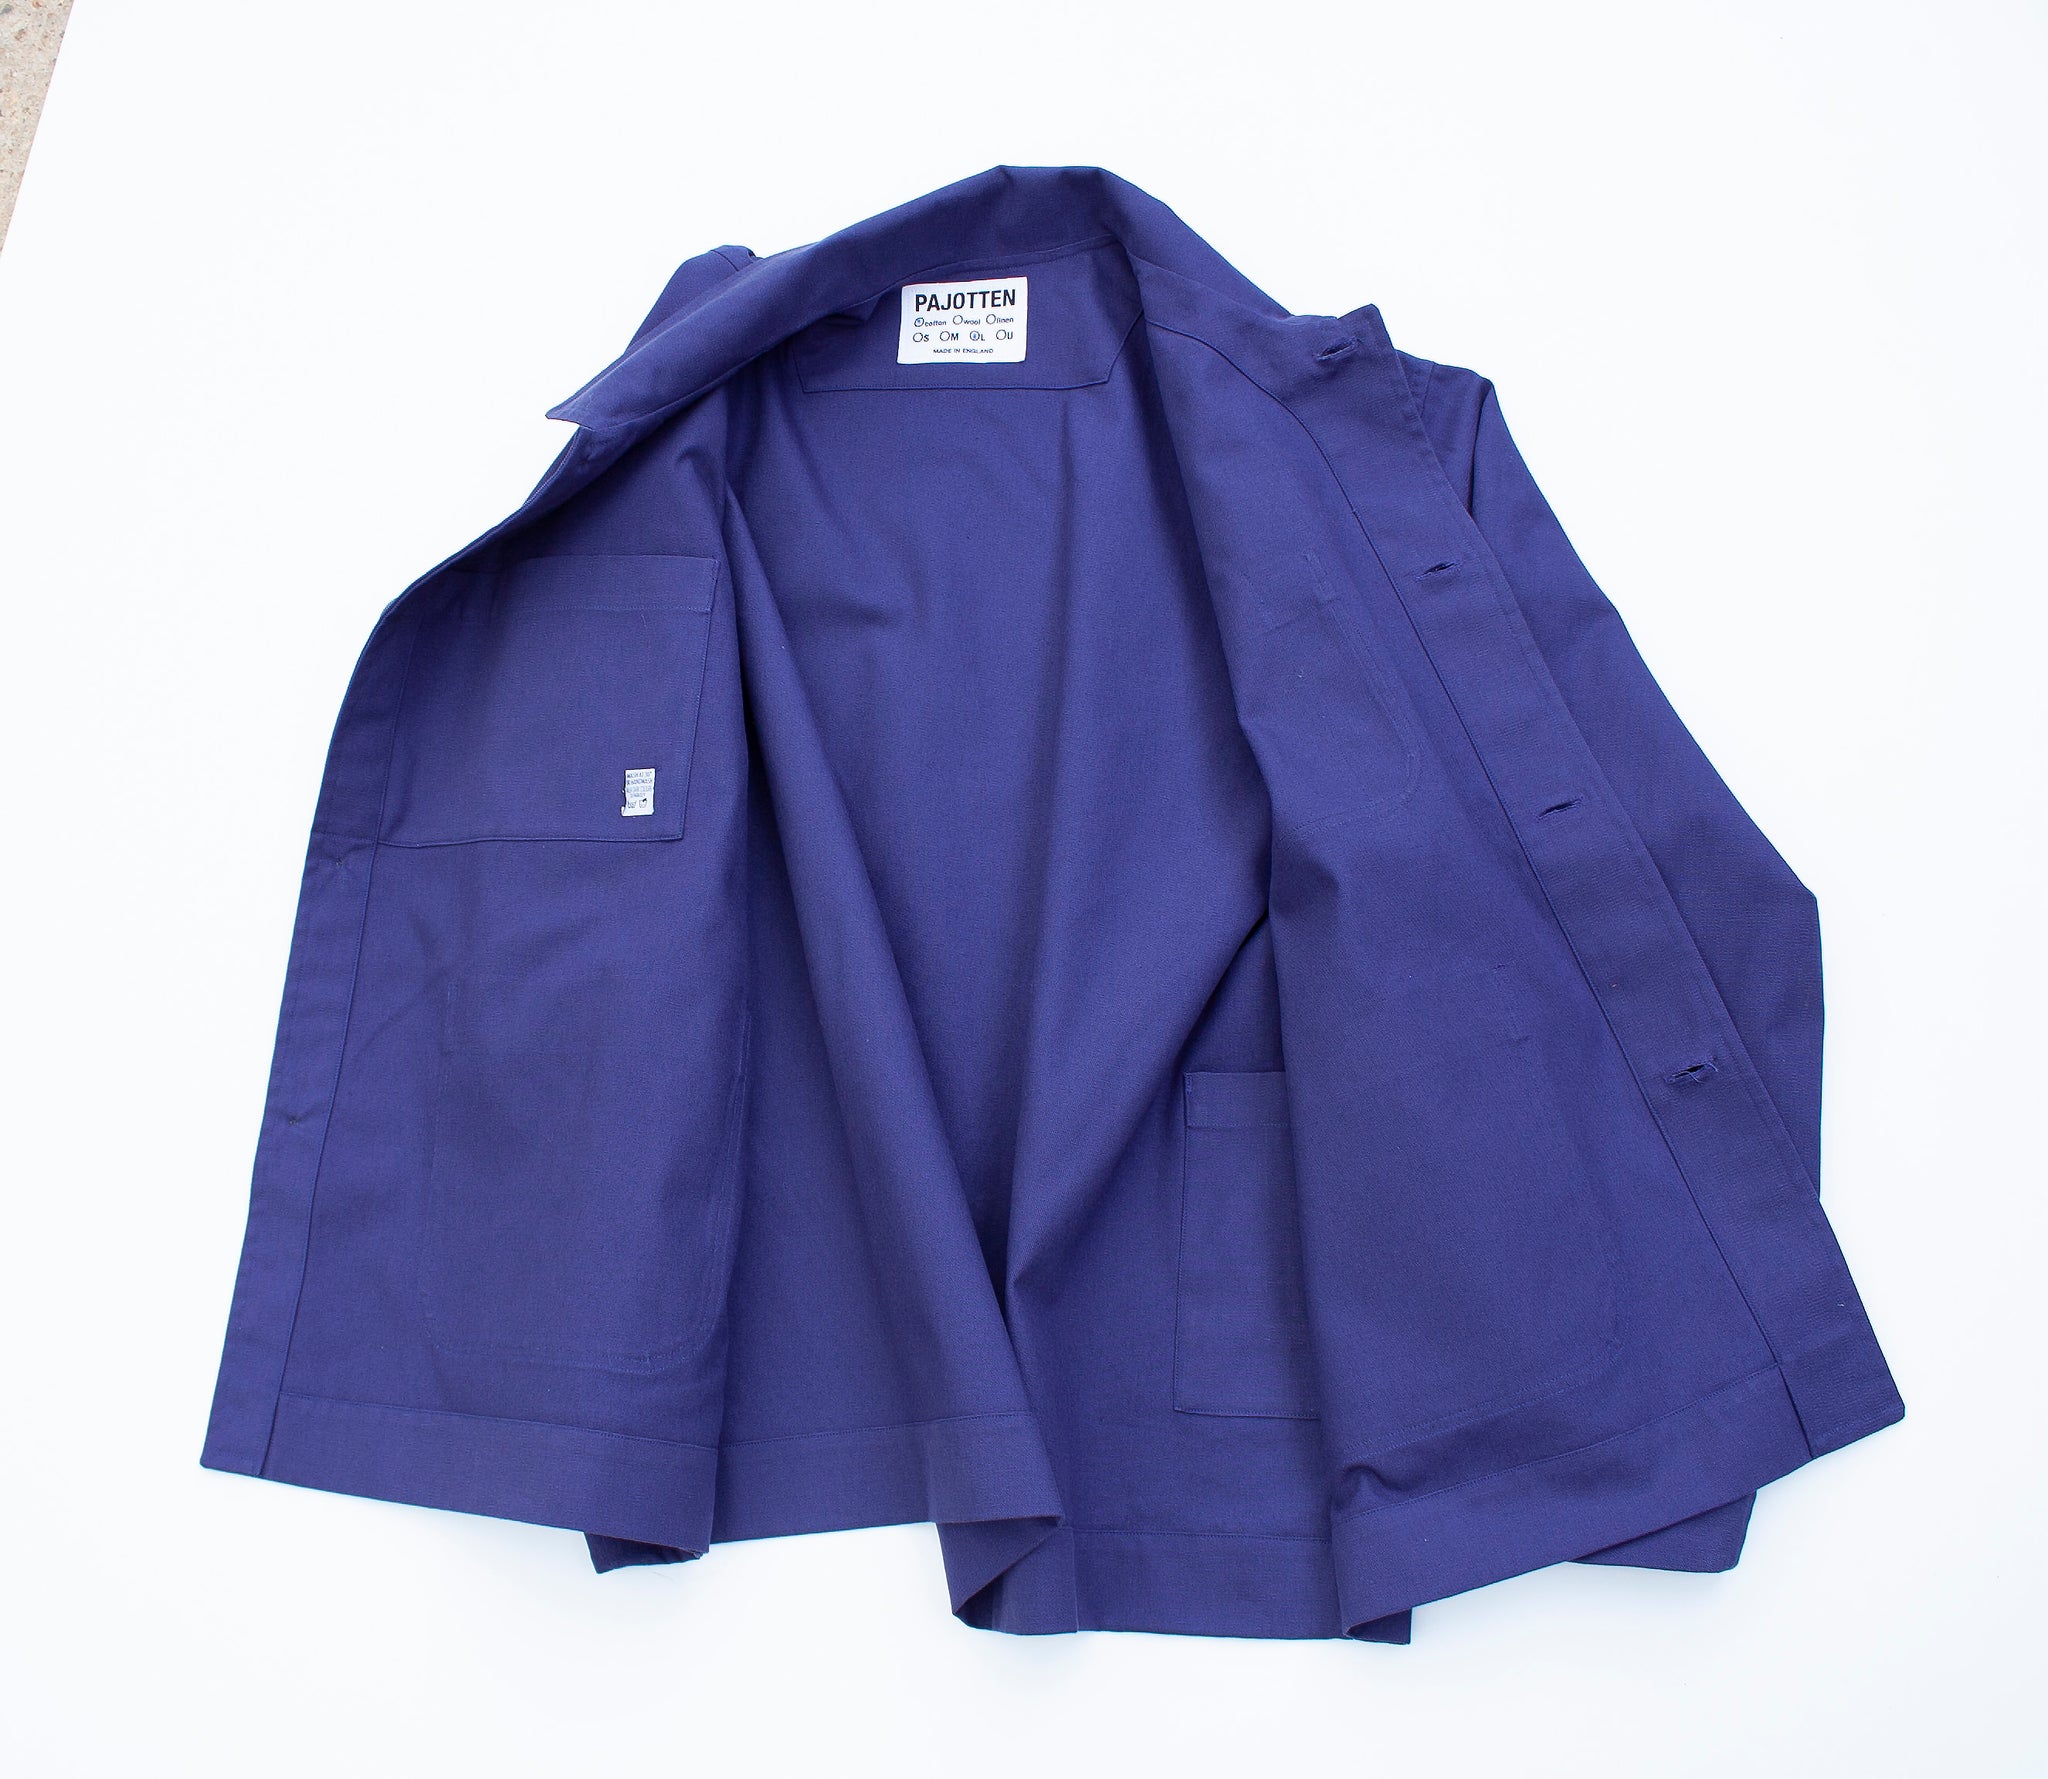 the inside view of an indigo tradional chore jacket made in brushed cotton canvas